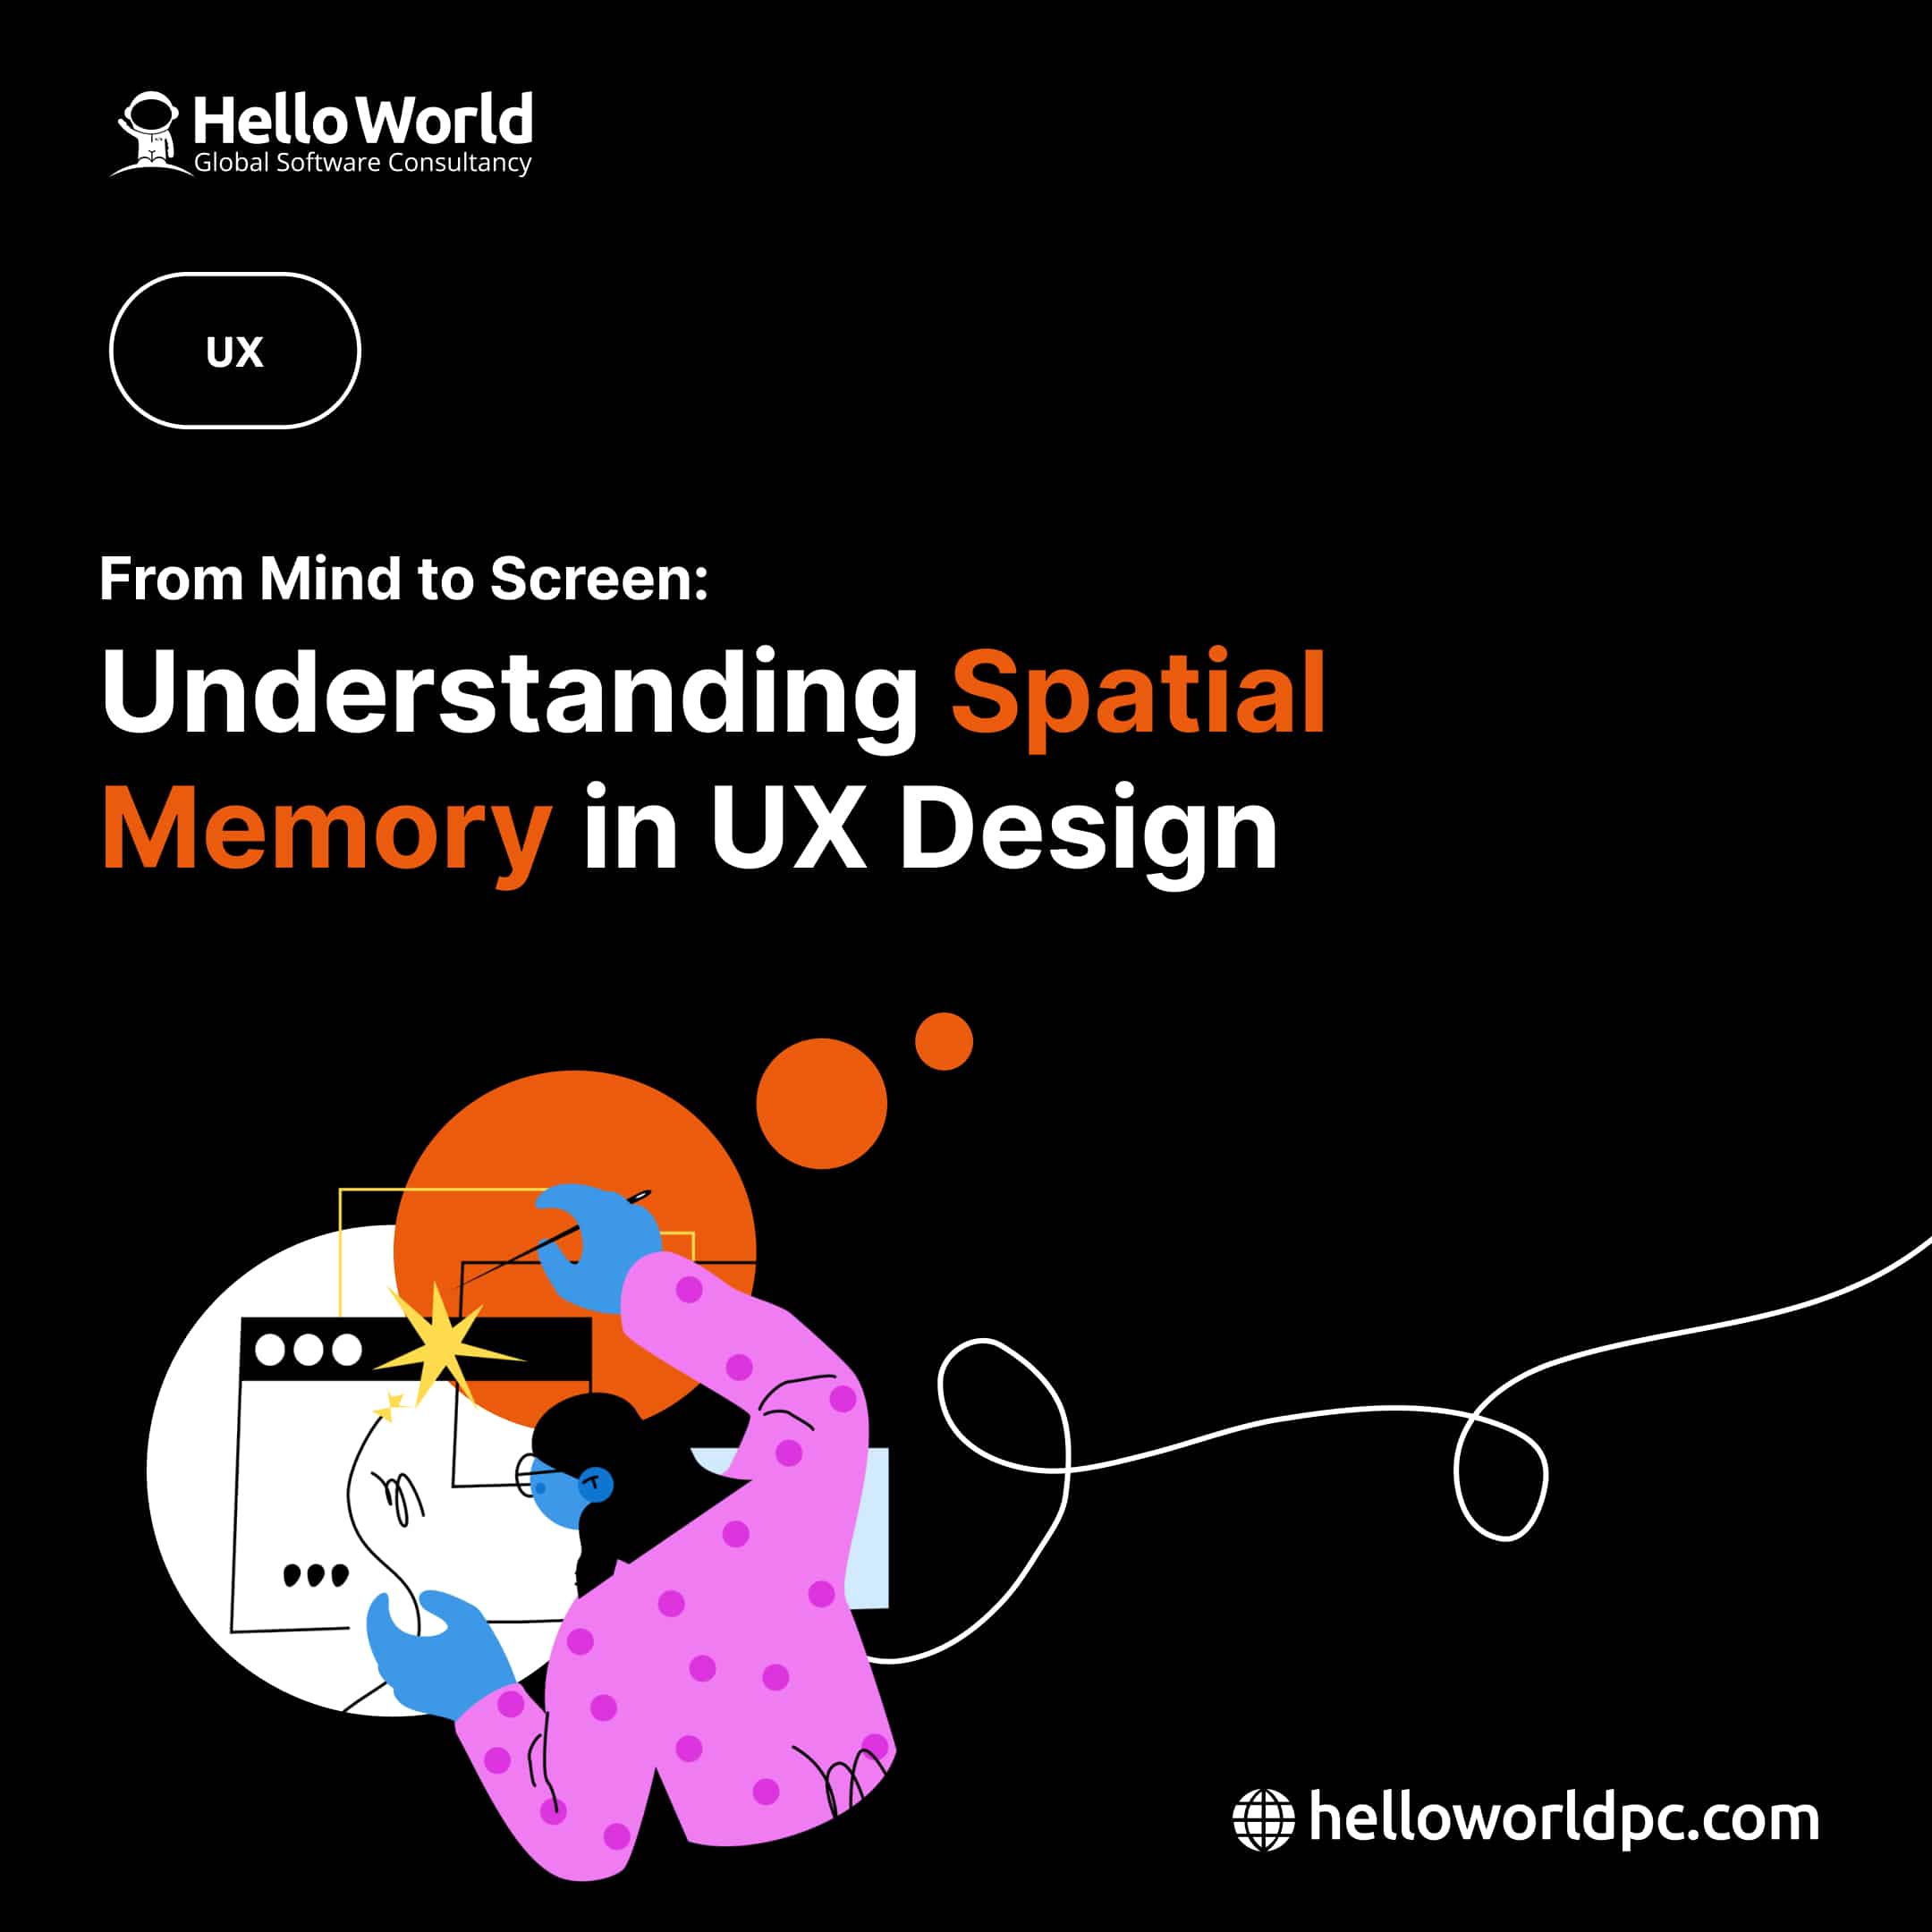 From Mind to Screen: Understanding Spatial Memory in UX Design